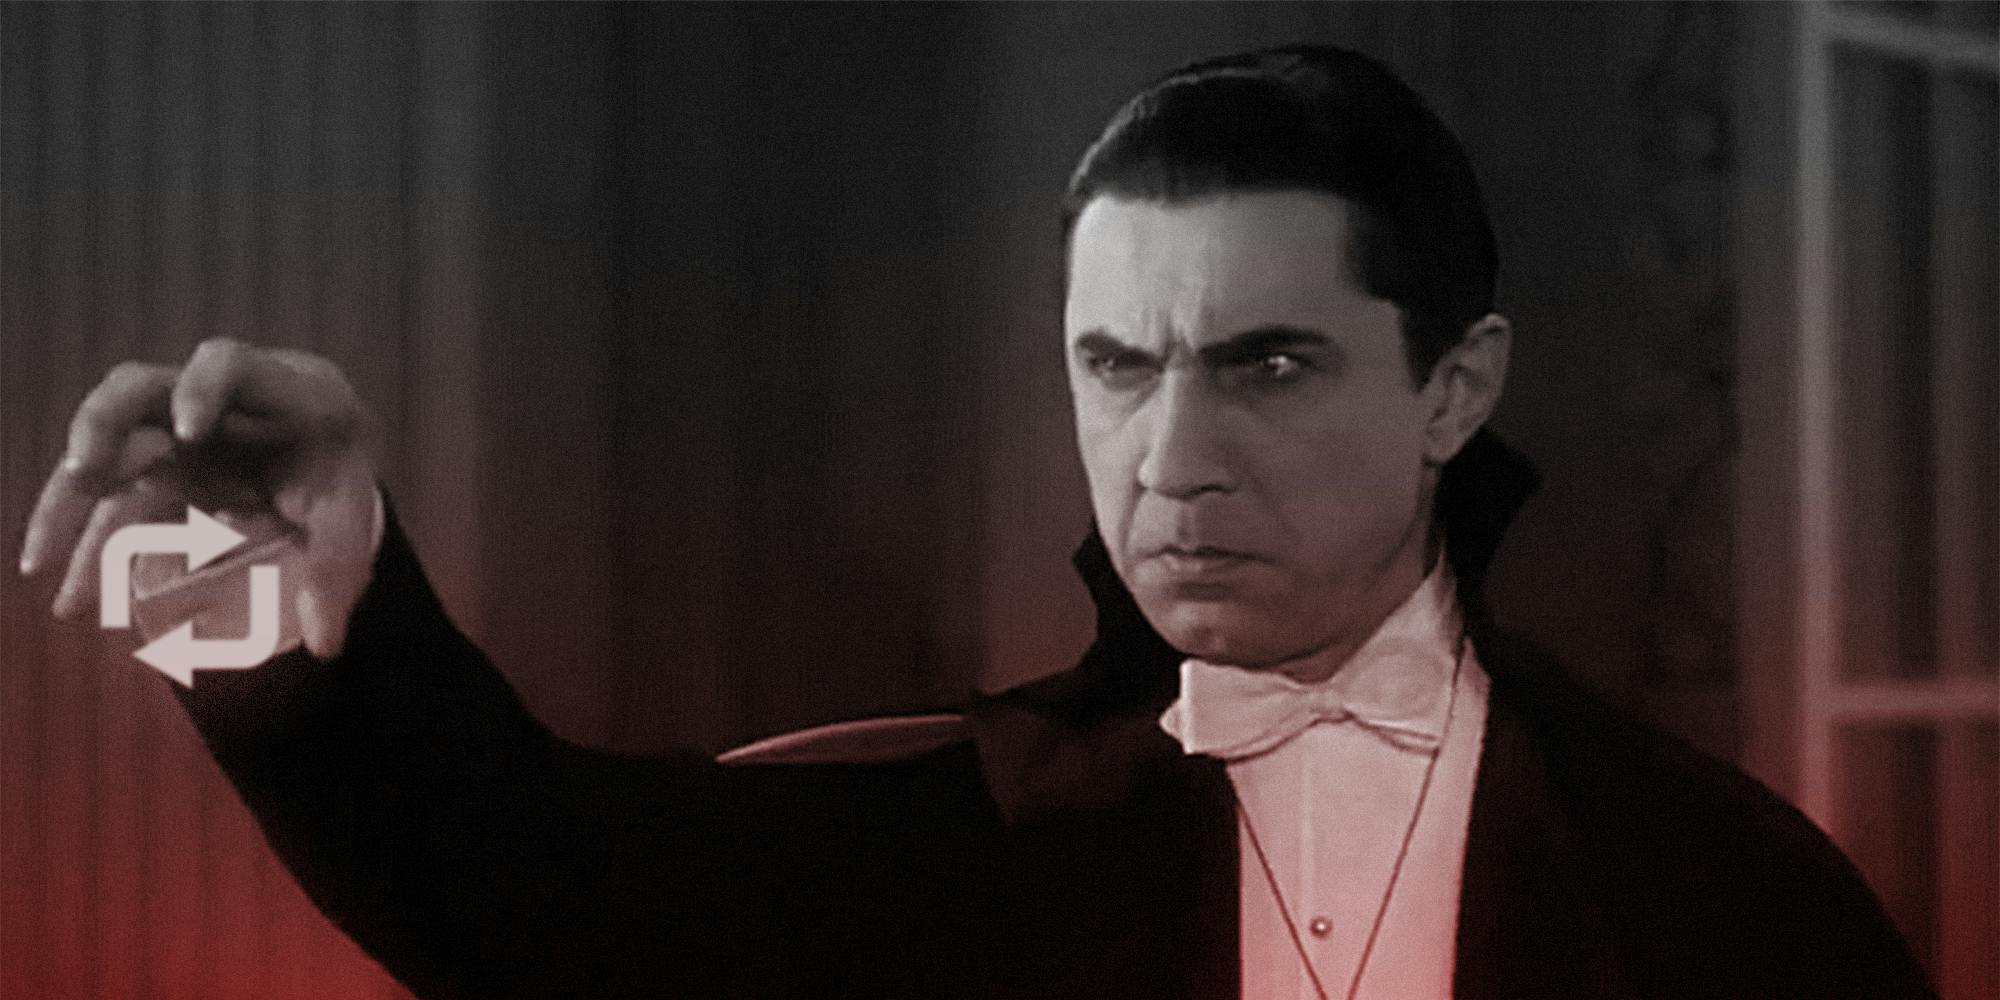 Bela Lugosi as Dracula holds up a hand with a Tumblr 'reblog' symbol floating within